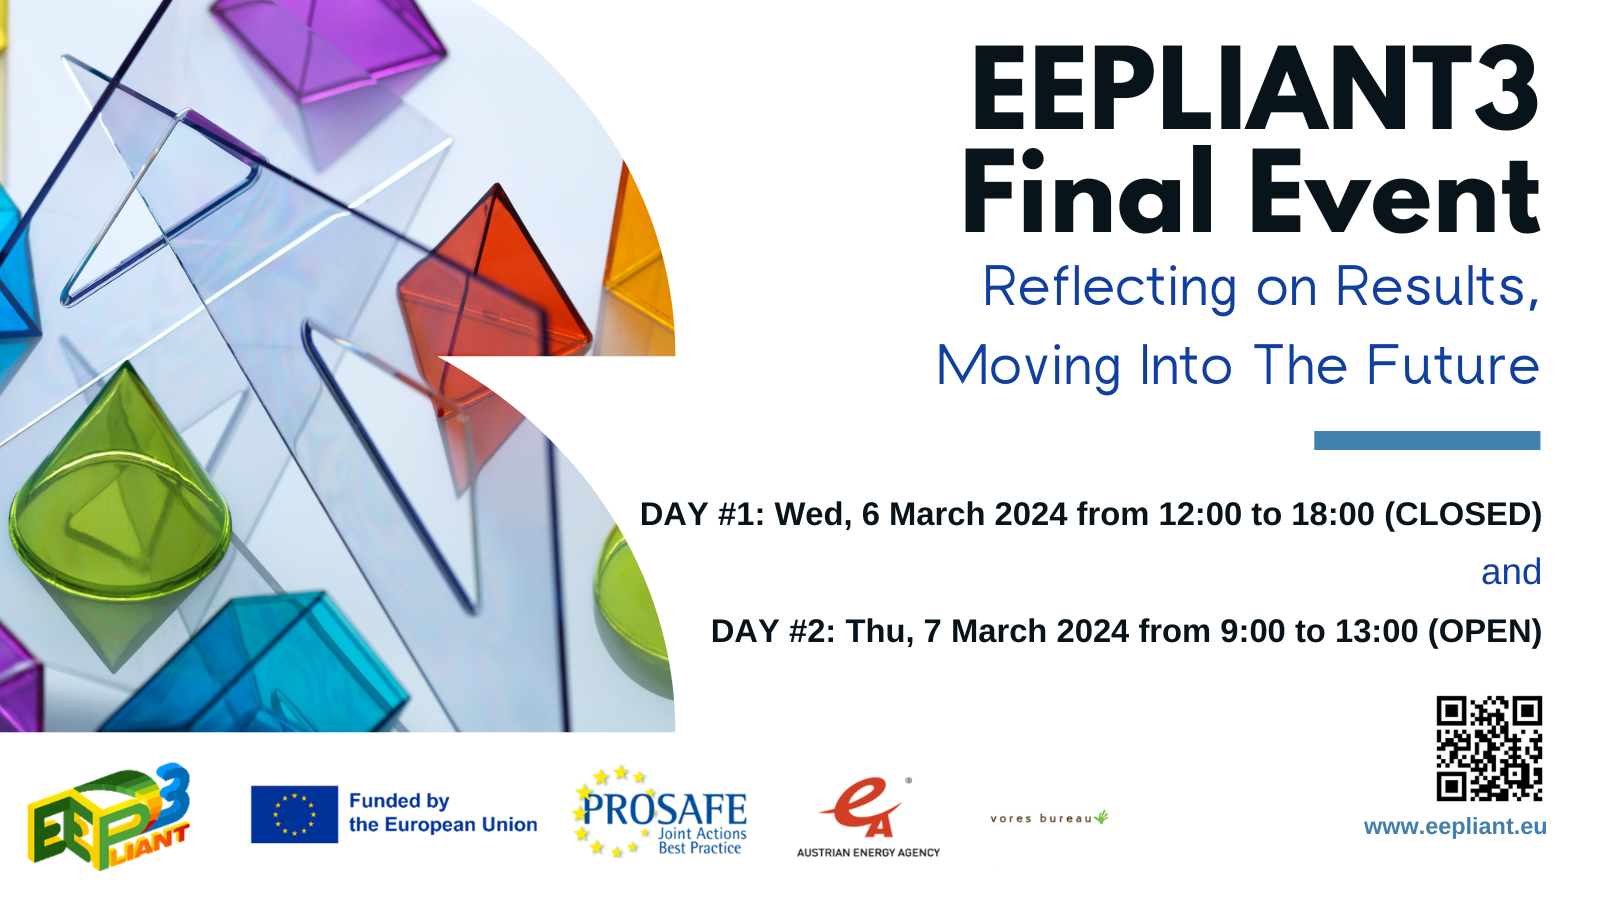 Eepliant3 Final Event with dates